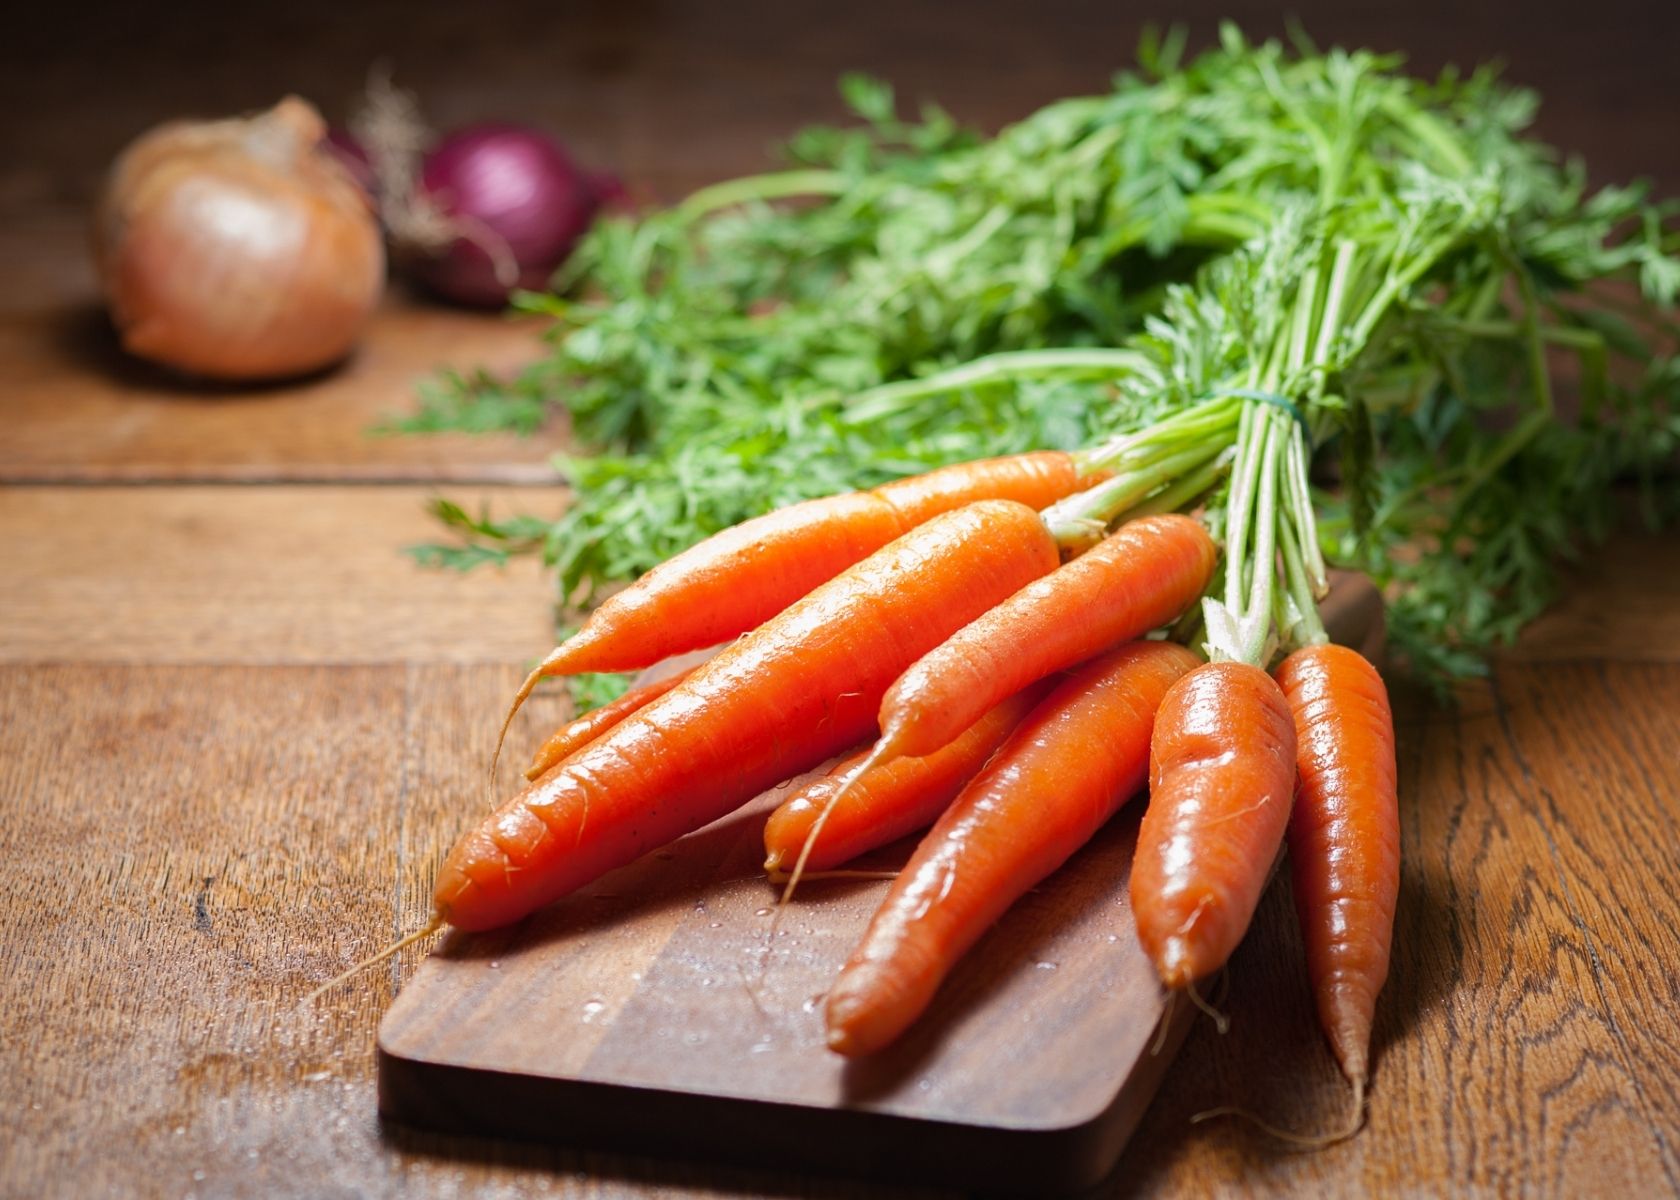 Large bunch of carrots with stems tight together on small wooden cutting board.